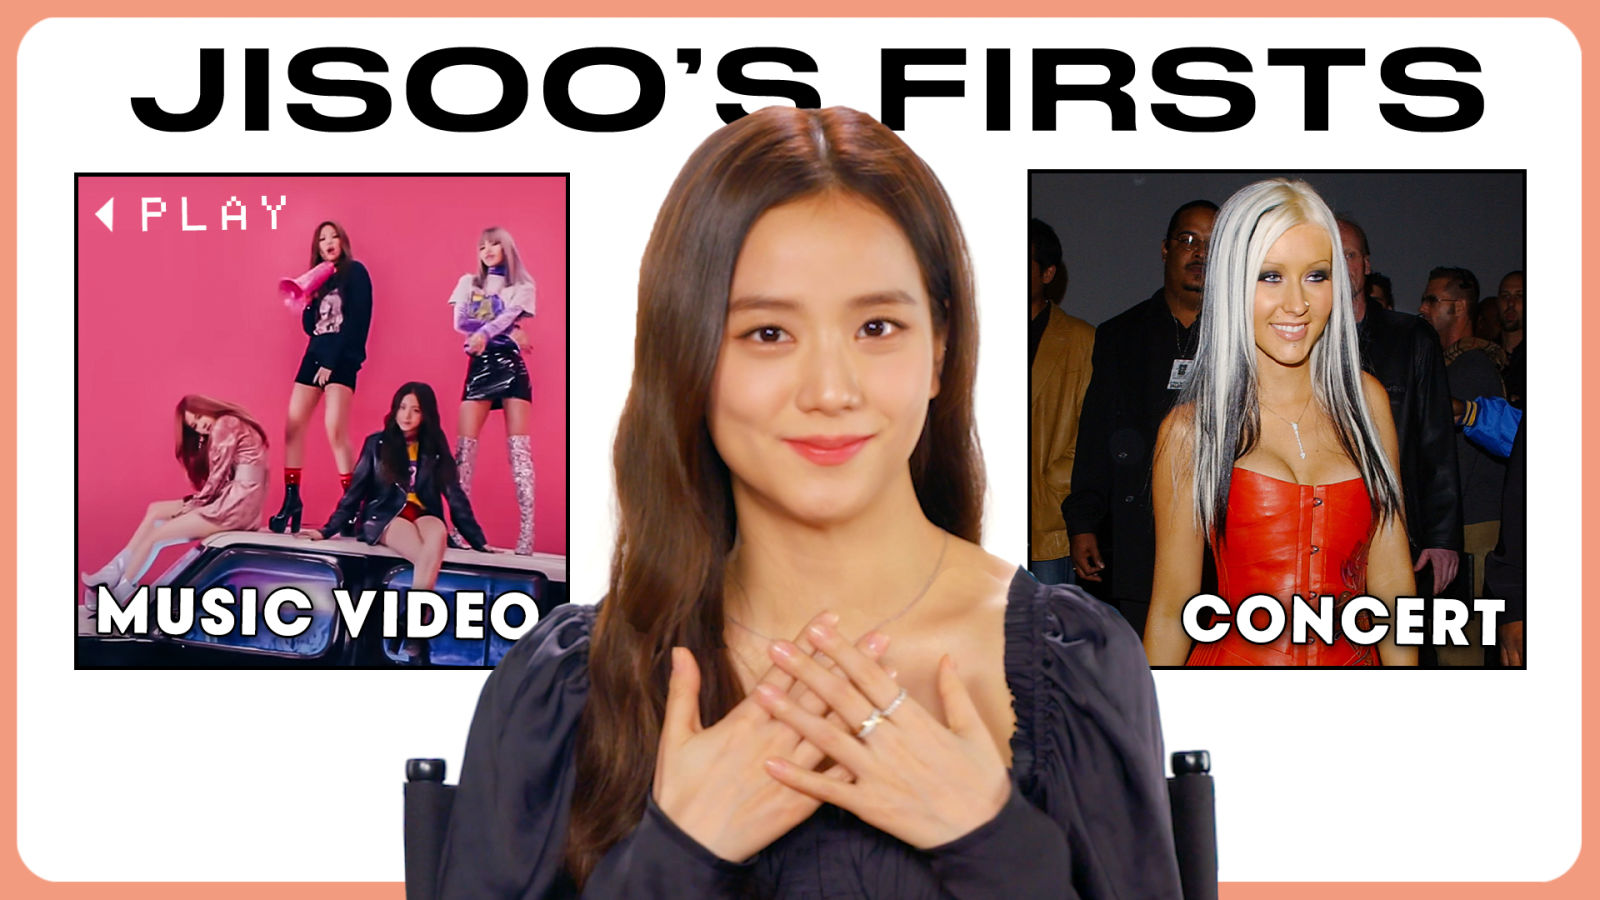 BLACKPINK's Jisoo Remembers Her "Firsts" 🖤💗